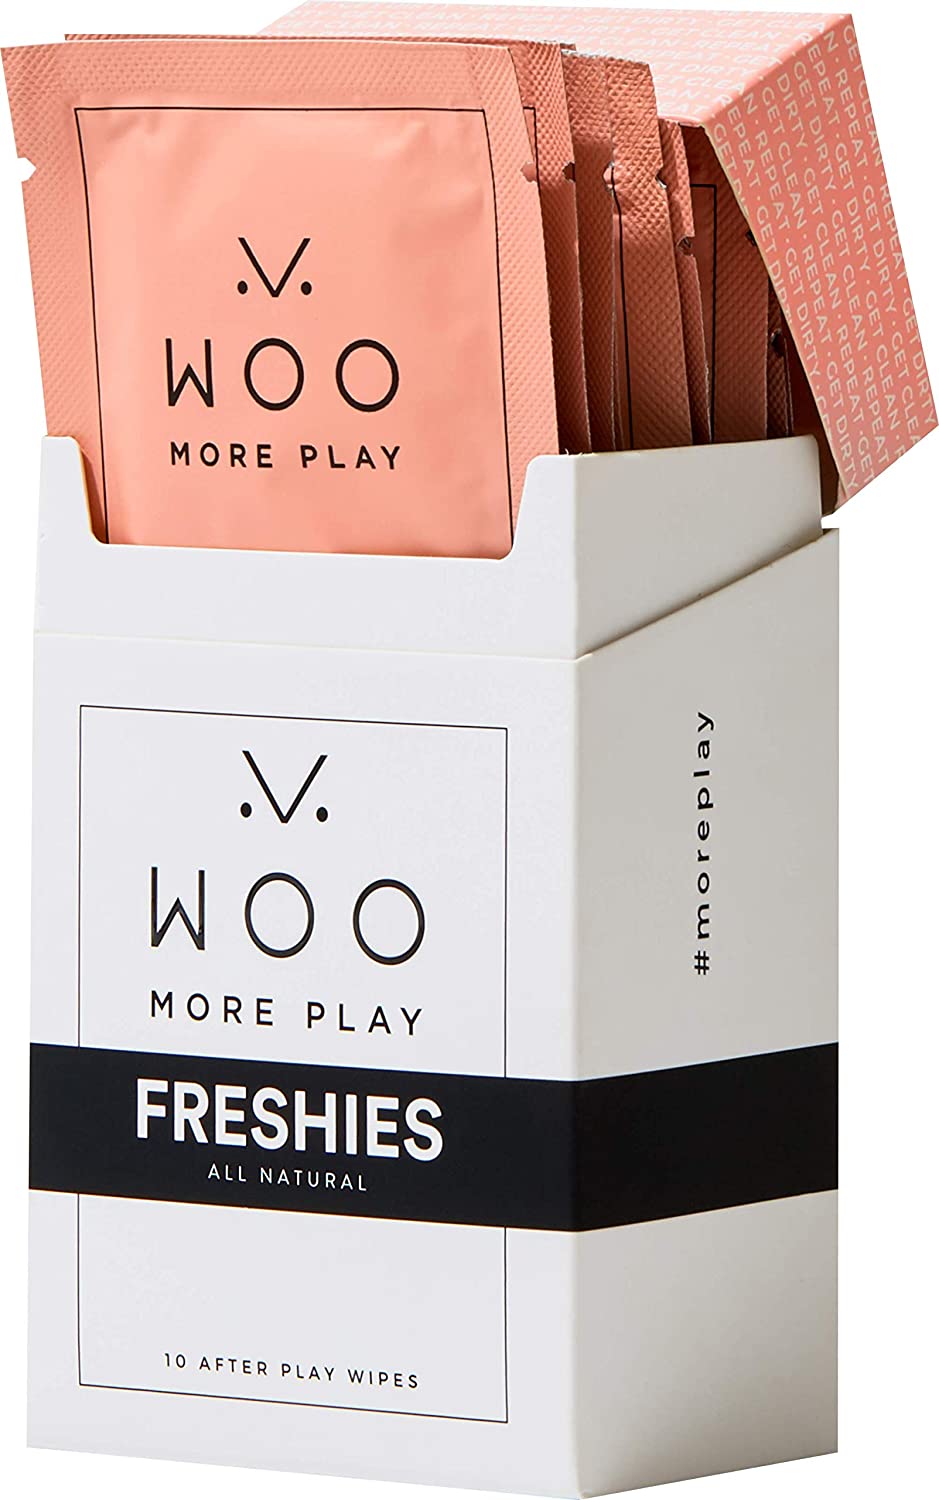 Woo More Play Freshies- All-Natural Feminine Intimacy Towelette Wipes